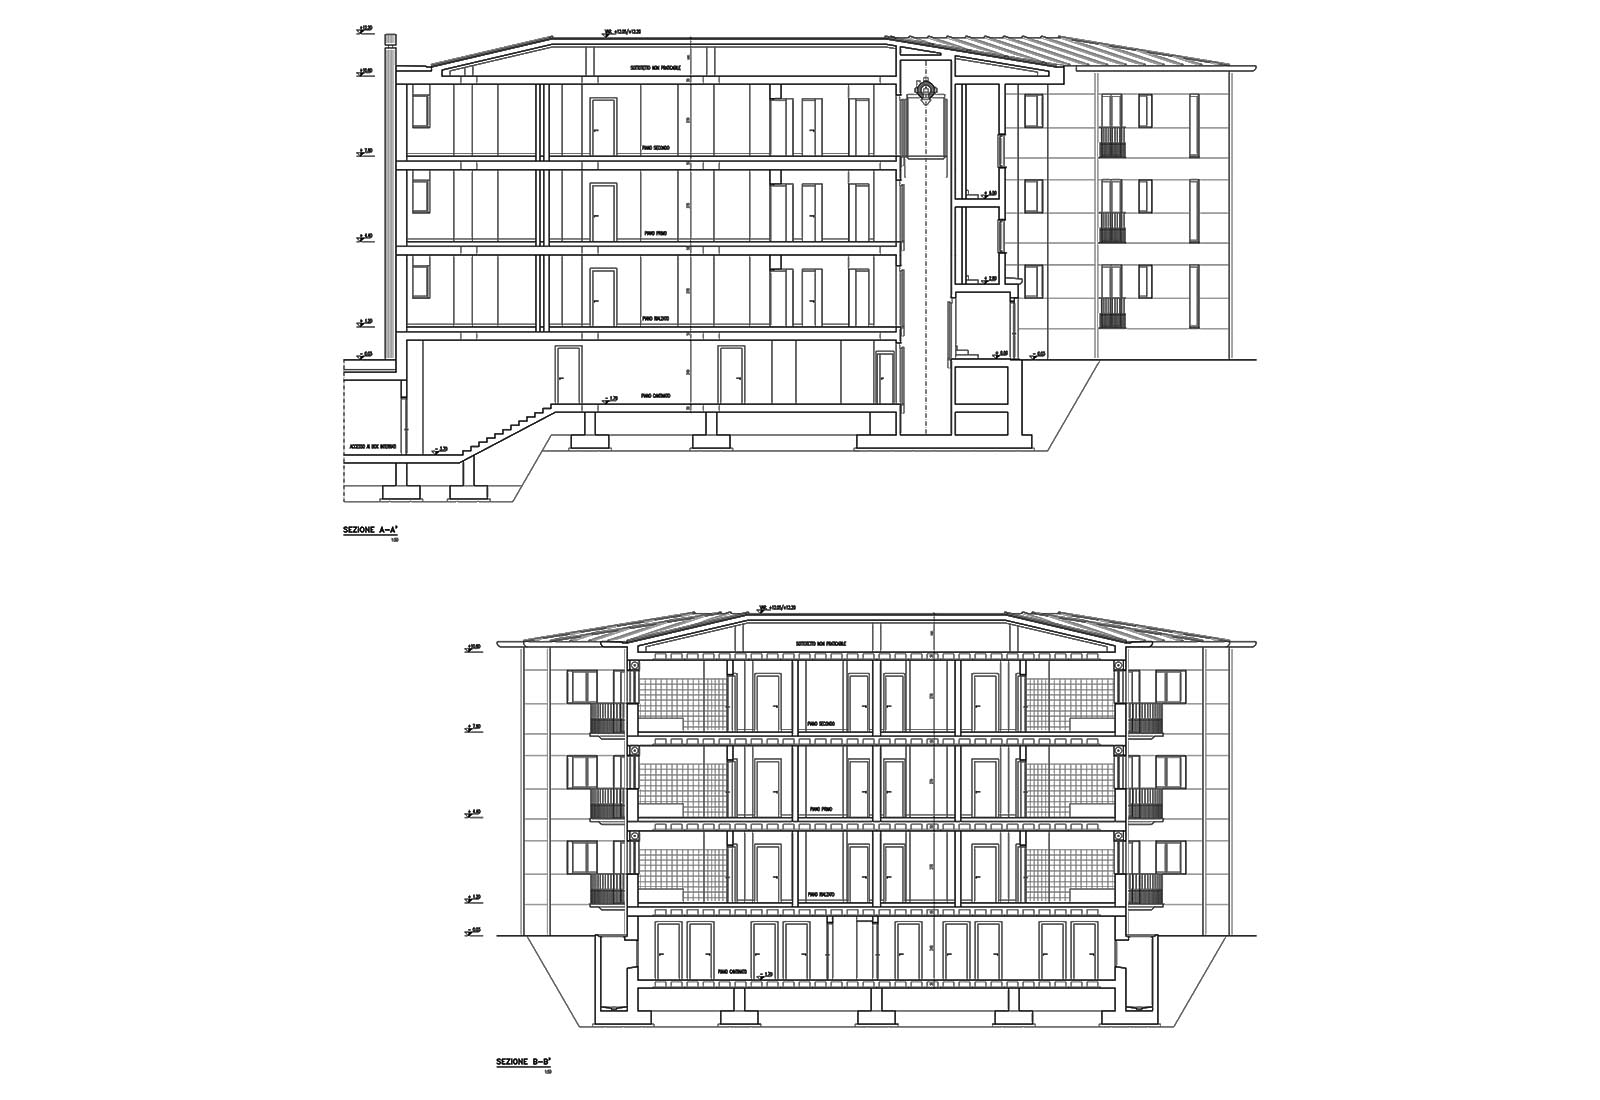 Residential ensemble in Macherio - Type A building - Sections